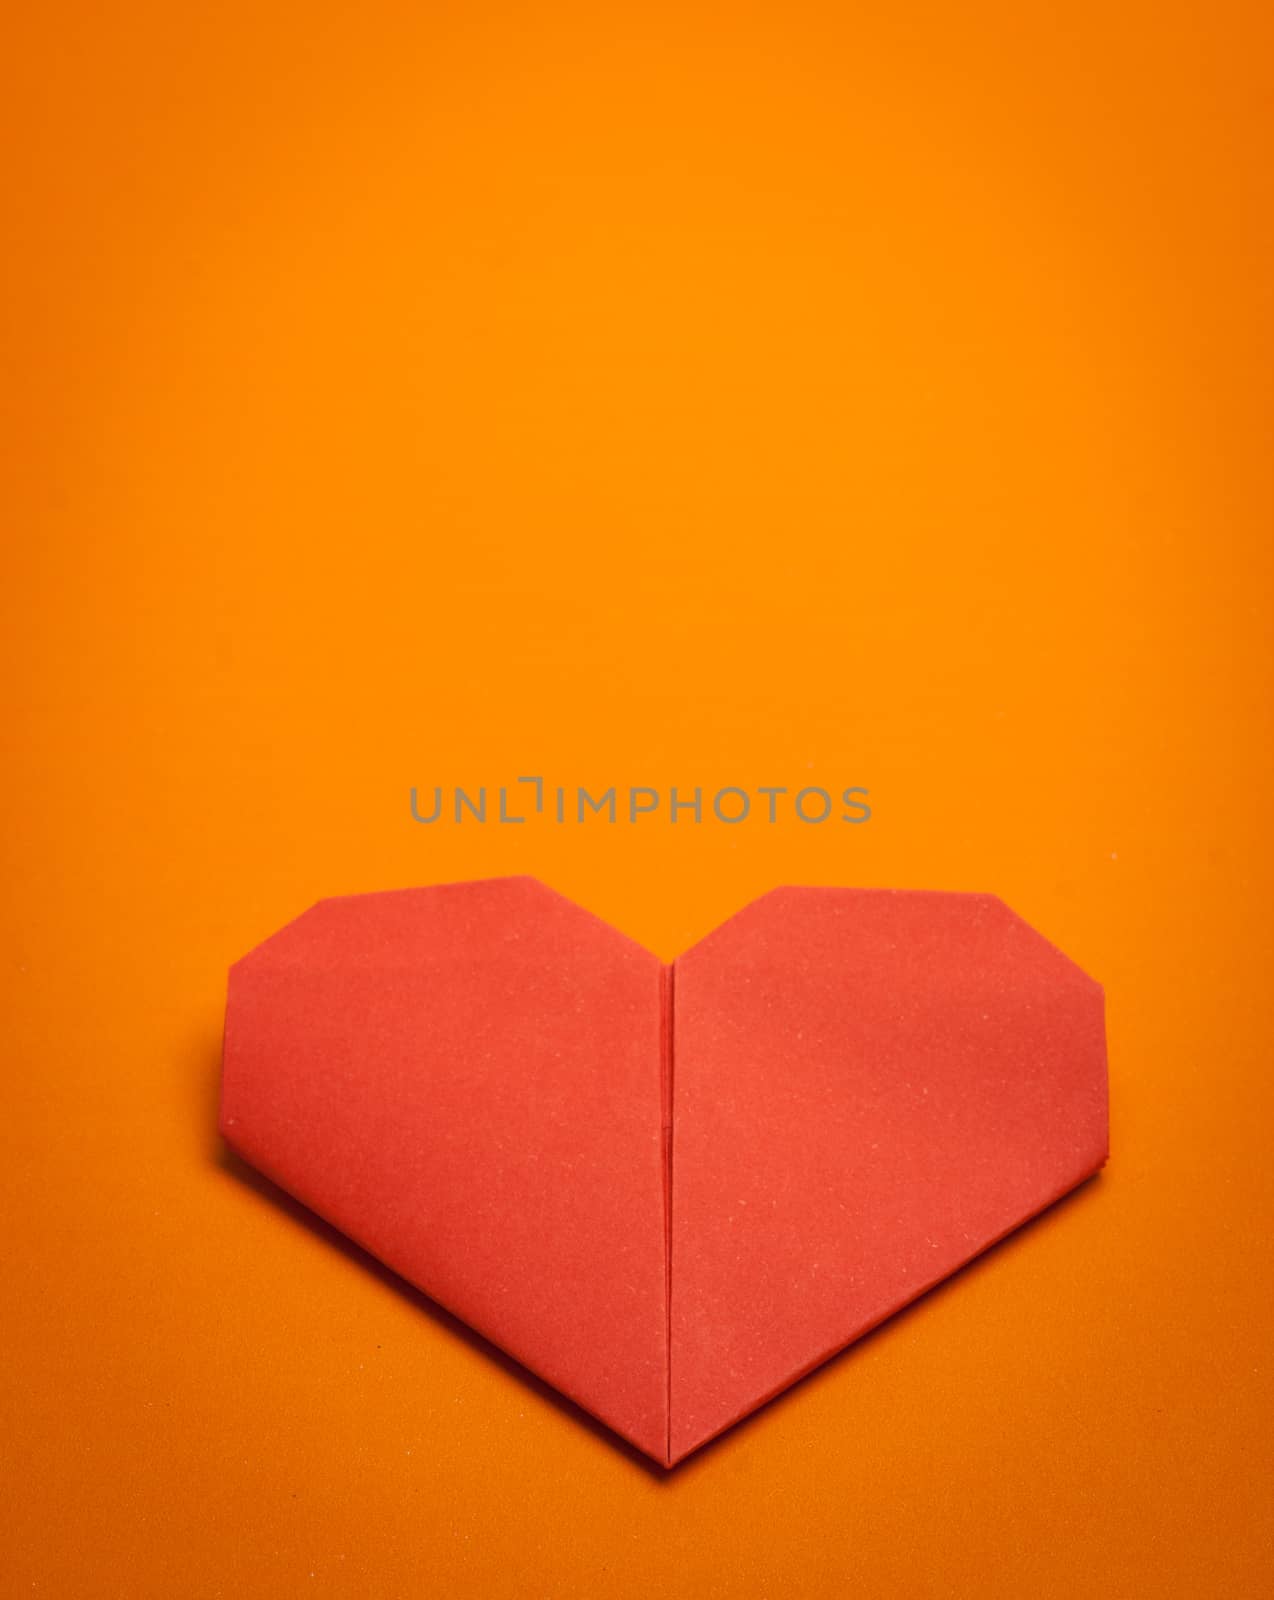 red origami paper heart on orange paper background